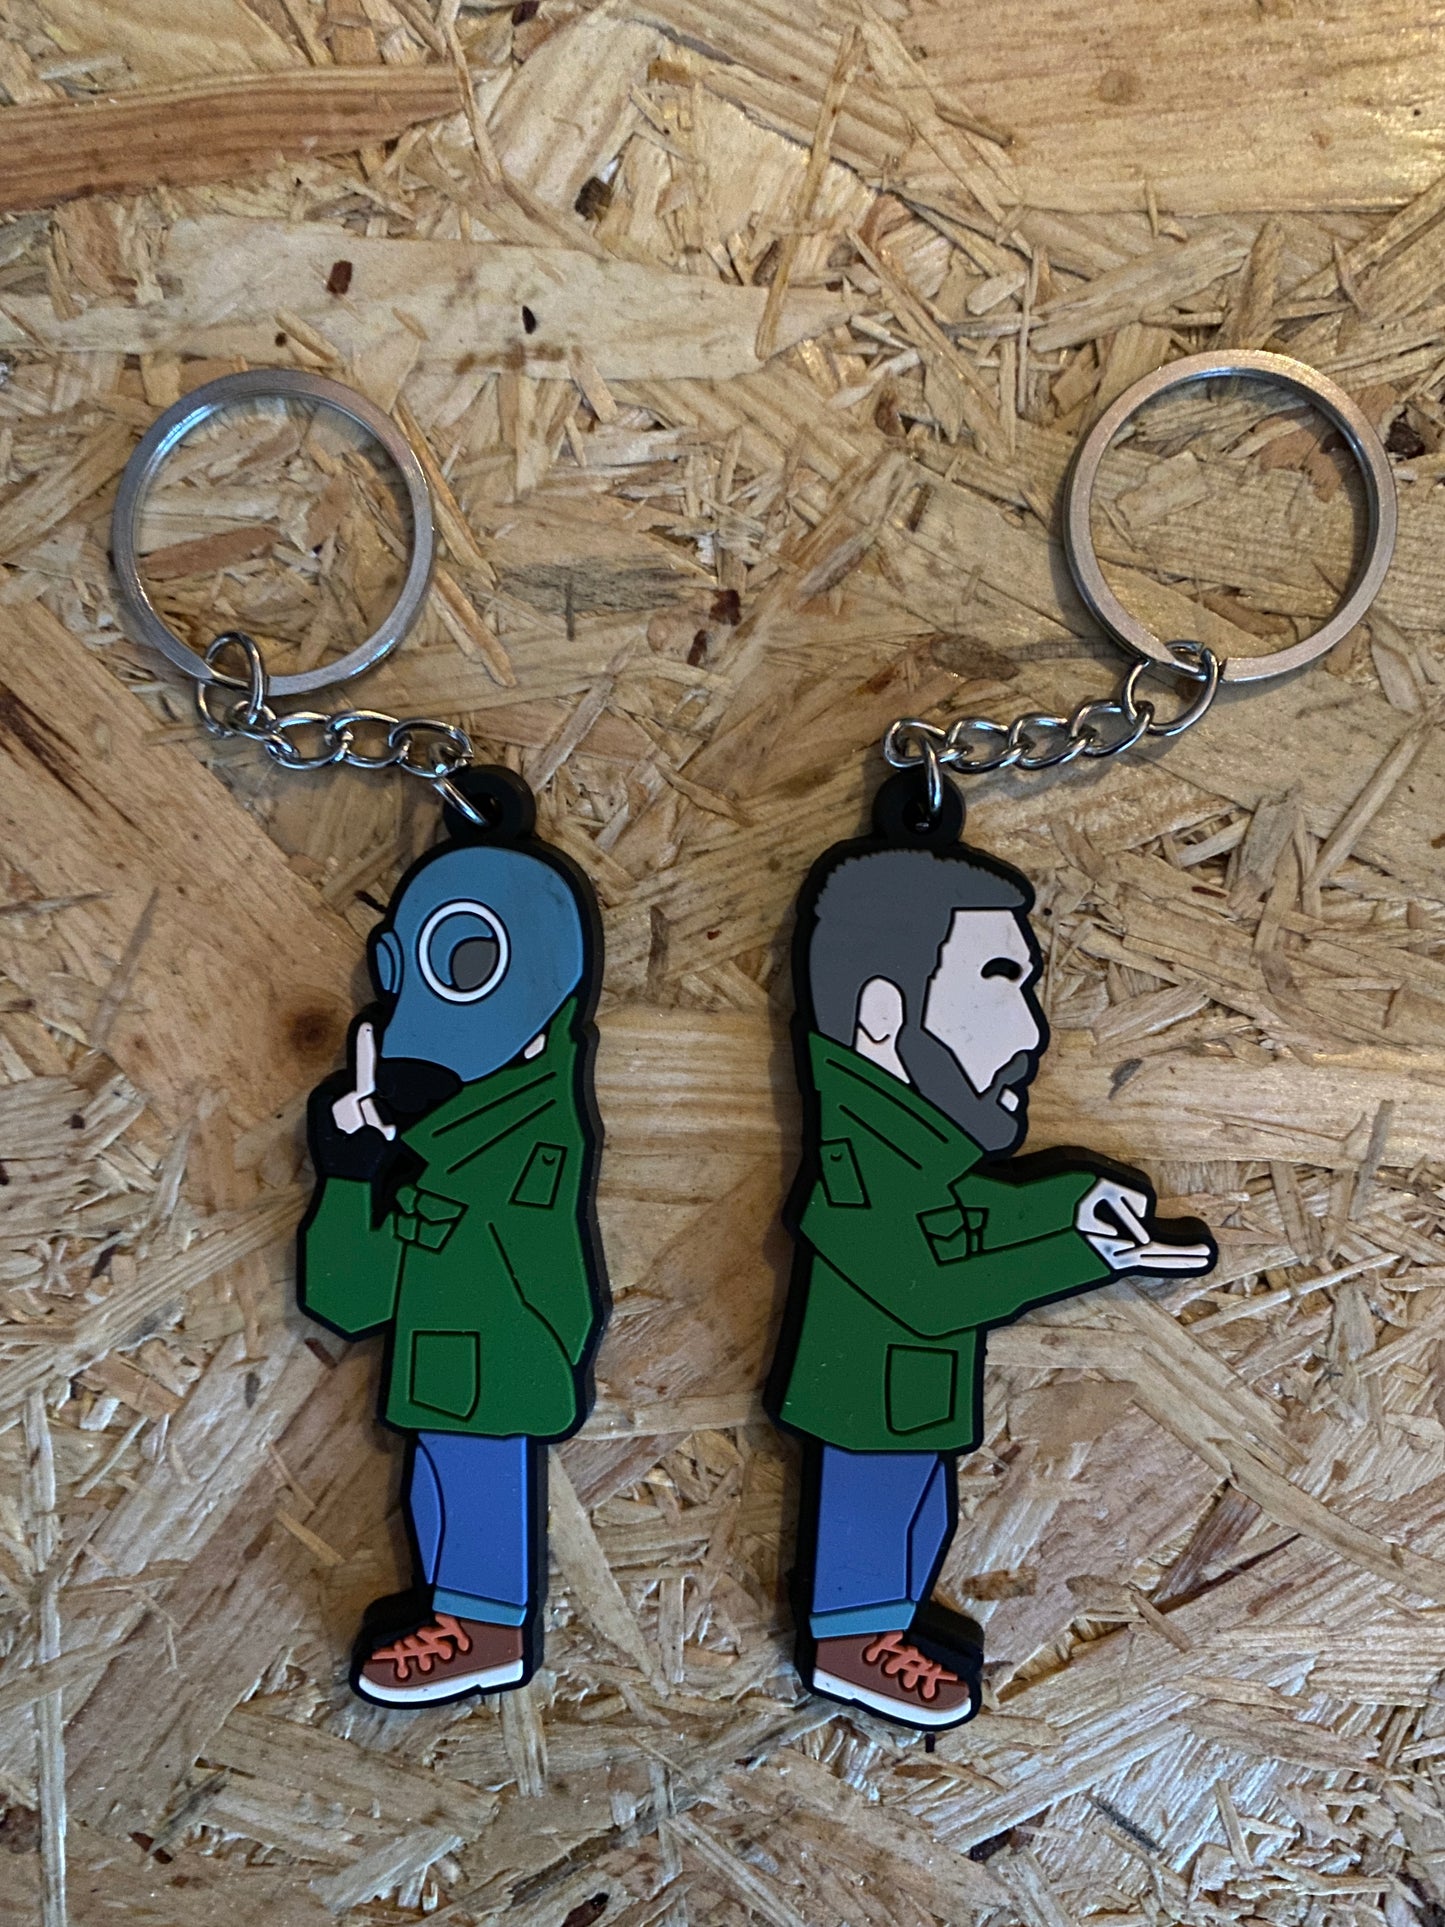 Dead Mans Shoes limited edition PVC rubber Keyring